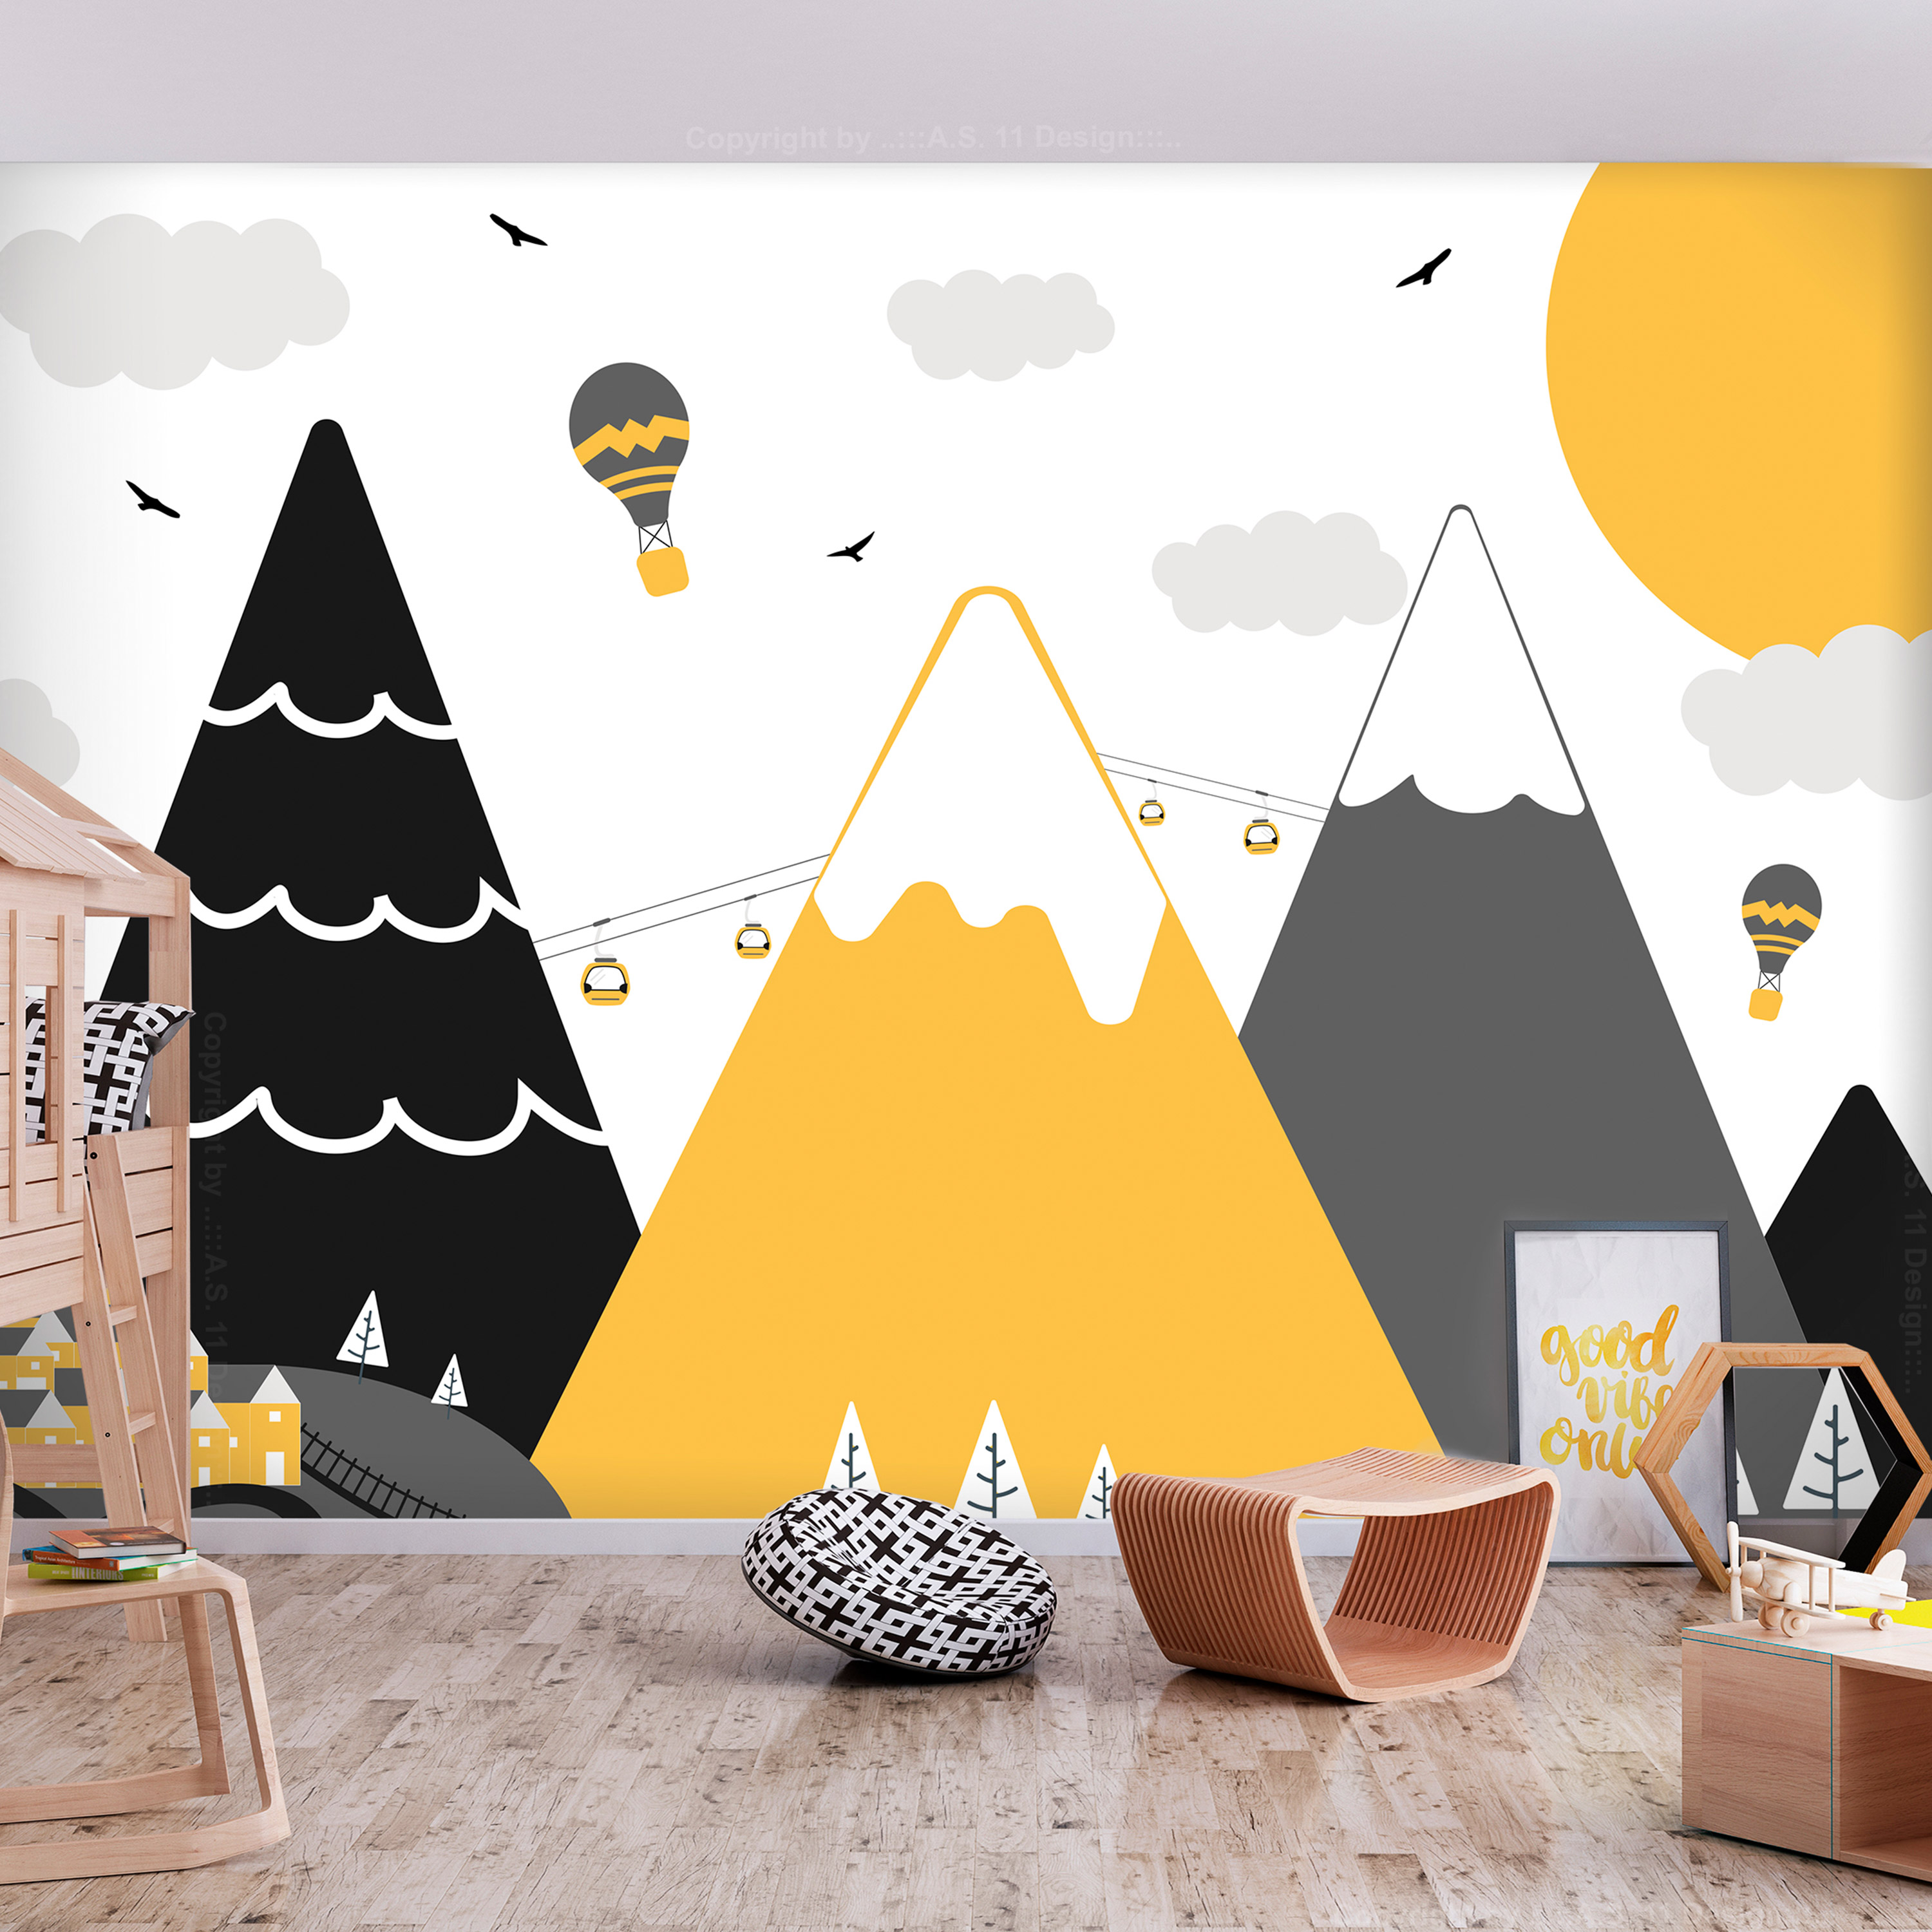 Self-adhesive Wallpaper - Adventure in the Mountains - 98x70